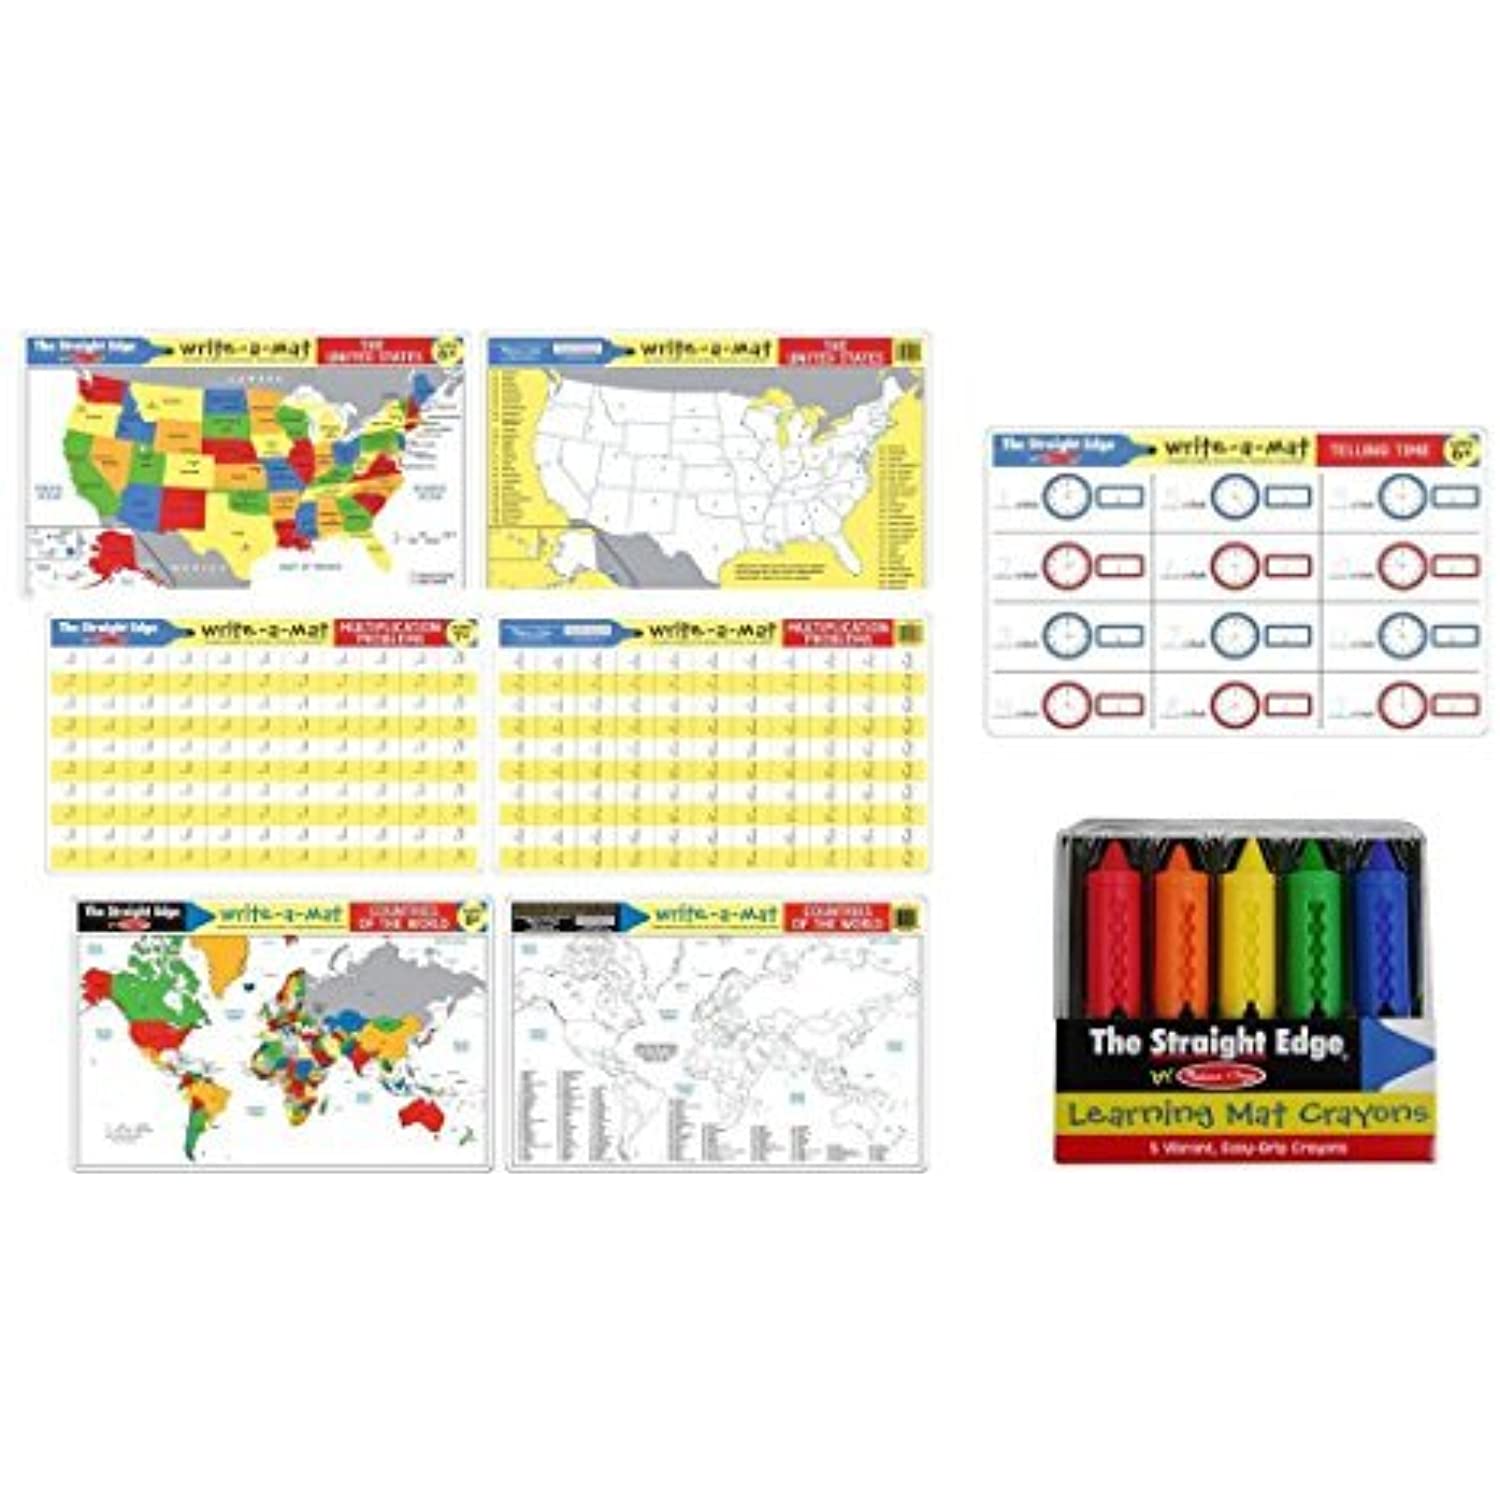 Melissa & Doug Telling Time, United States, Multiplication, Countries Placemats - 4 x Learning Mats for age 6-7 group with bonus Learning Mat Crayons